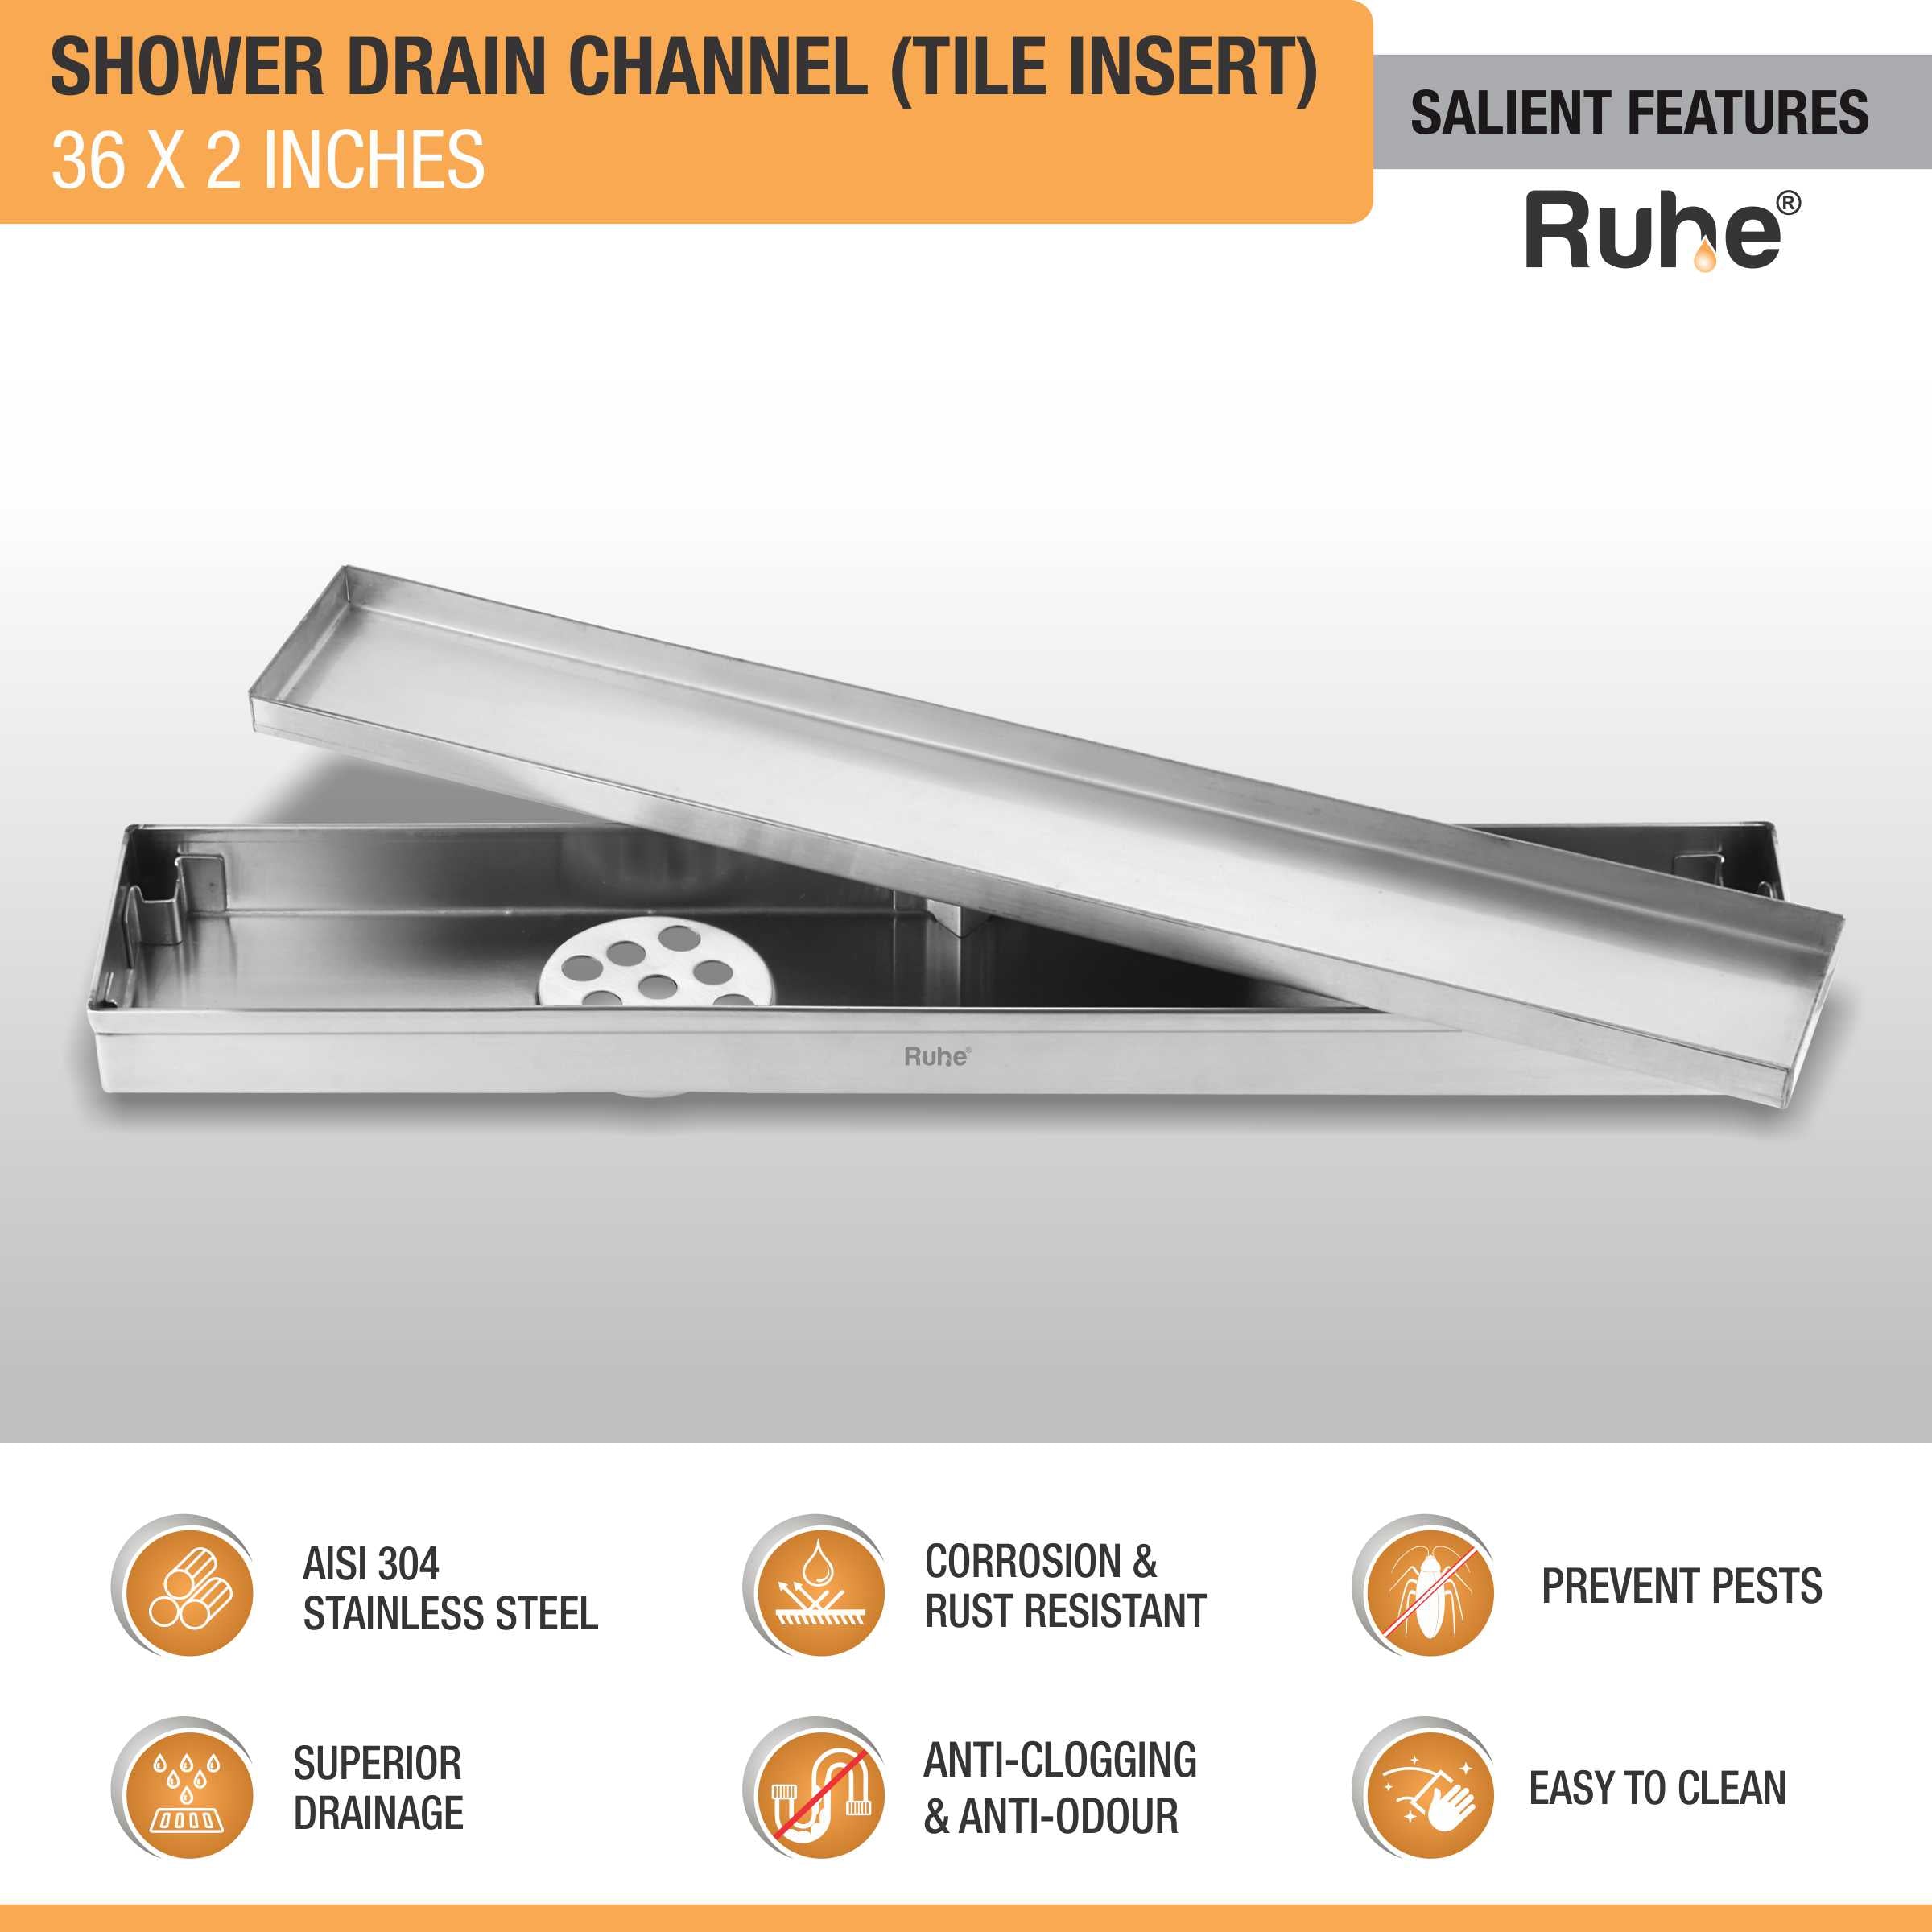 Tile Insert Shower Drain Channel (36 x 2 Inches) (304 Grade) features